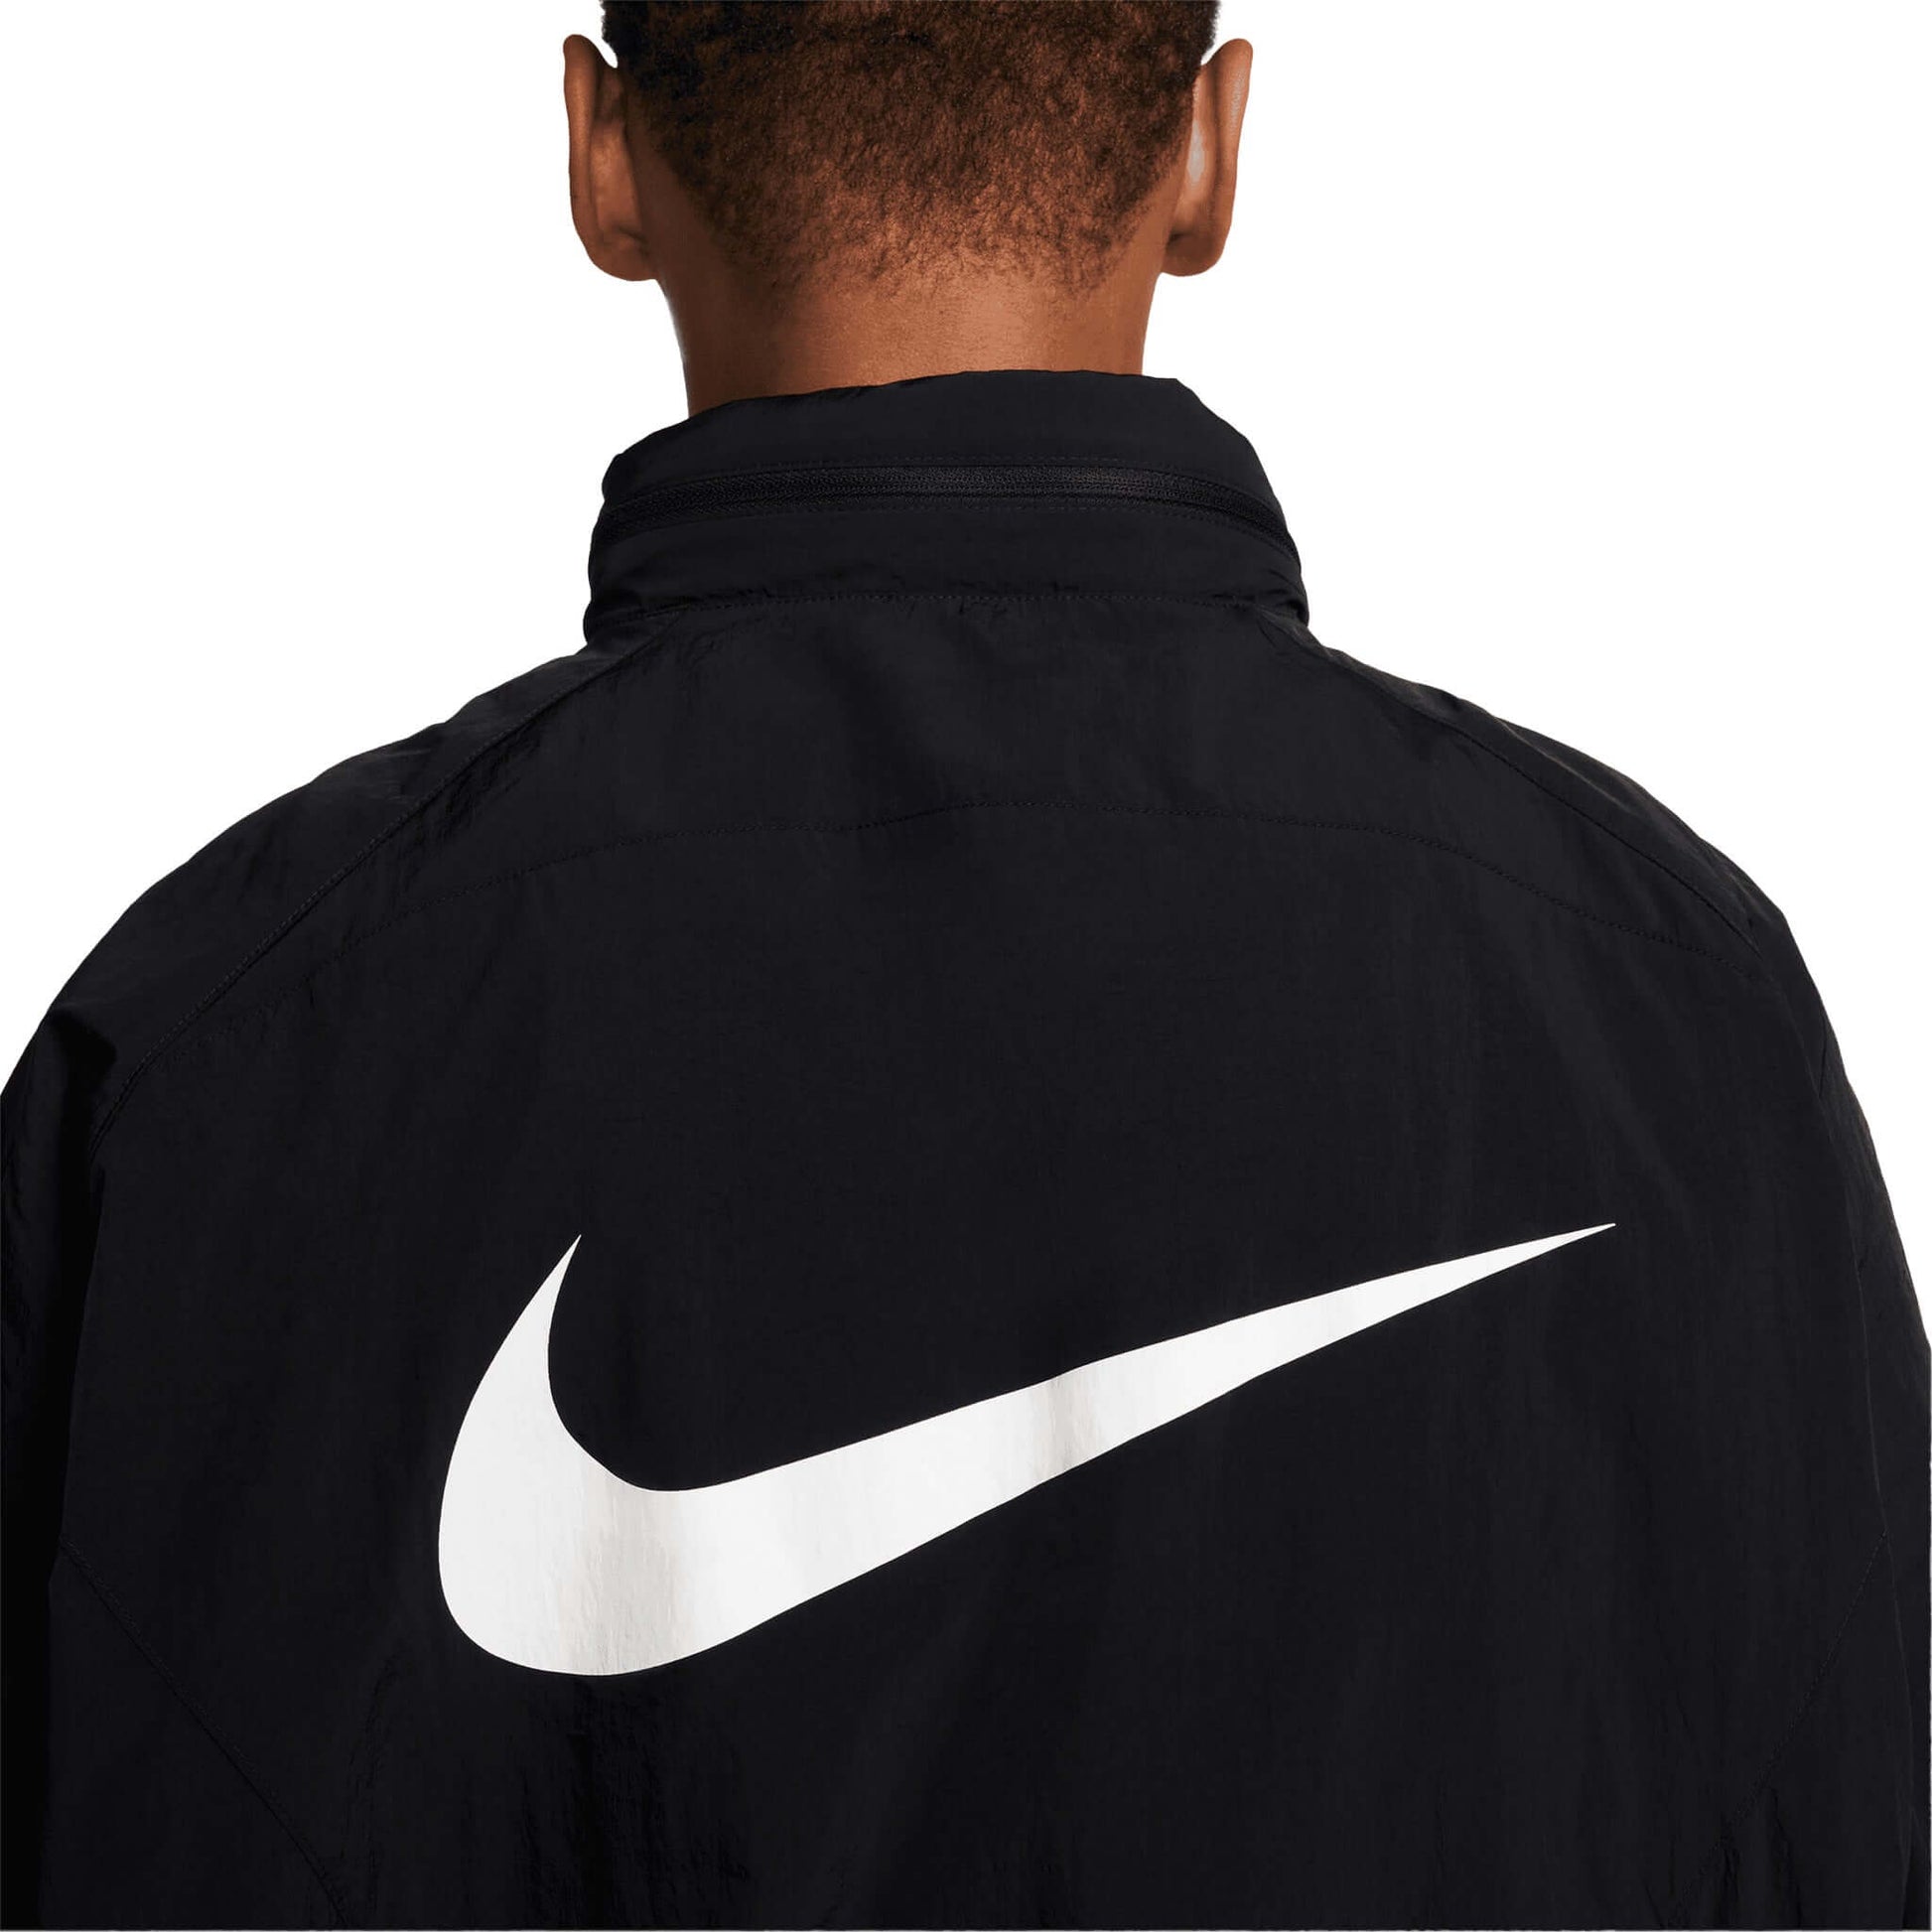 Culture of Football Therma-FIT Repel Hooded Soccer Jacket | EvangelistaSports.com | Canada's Premiere Soccer Store